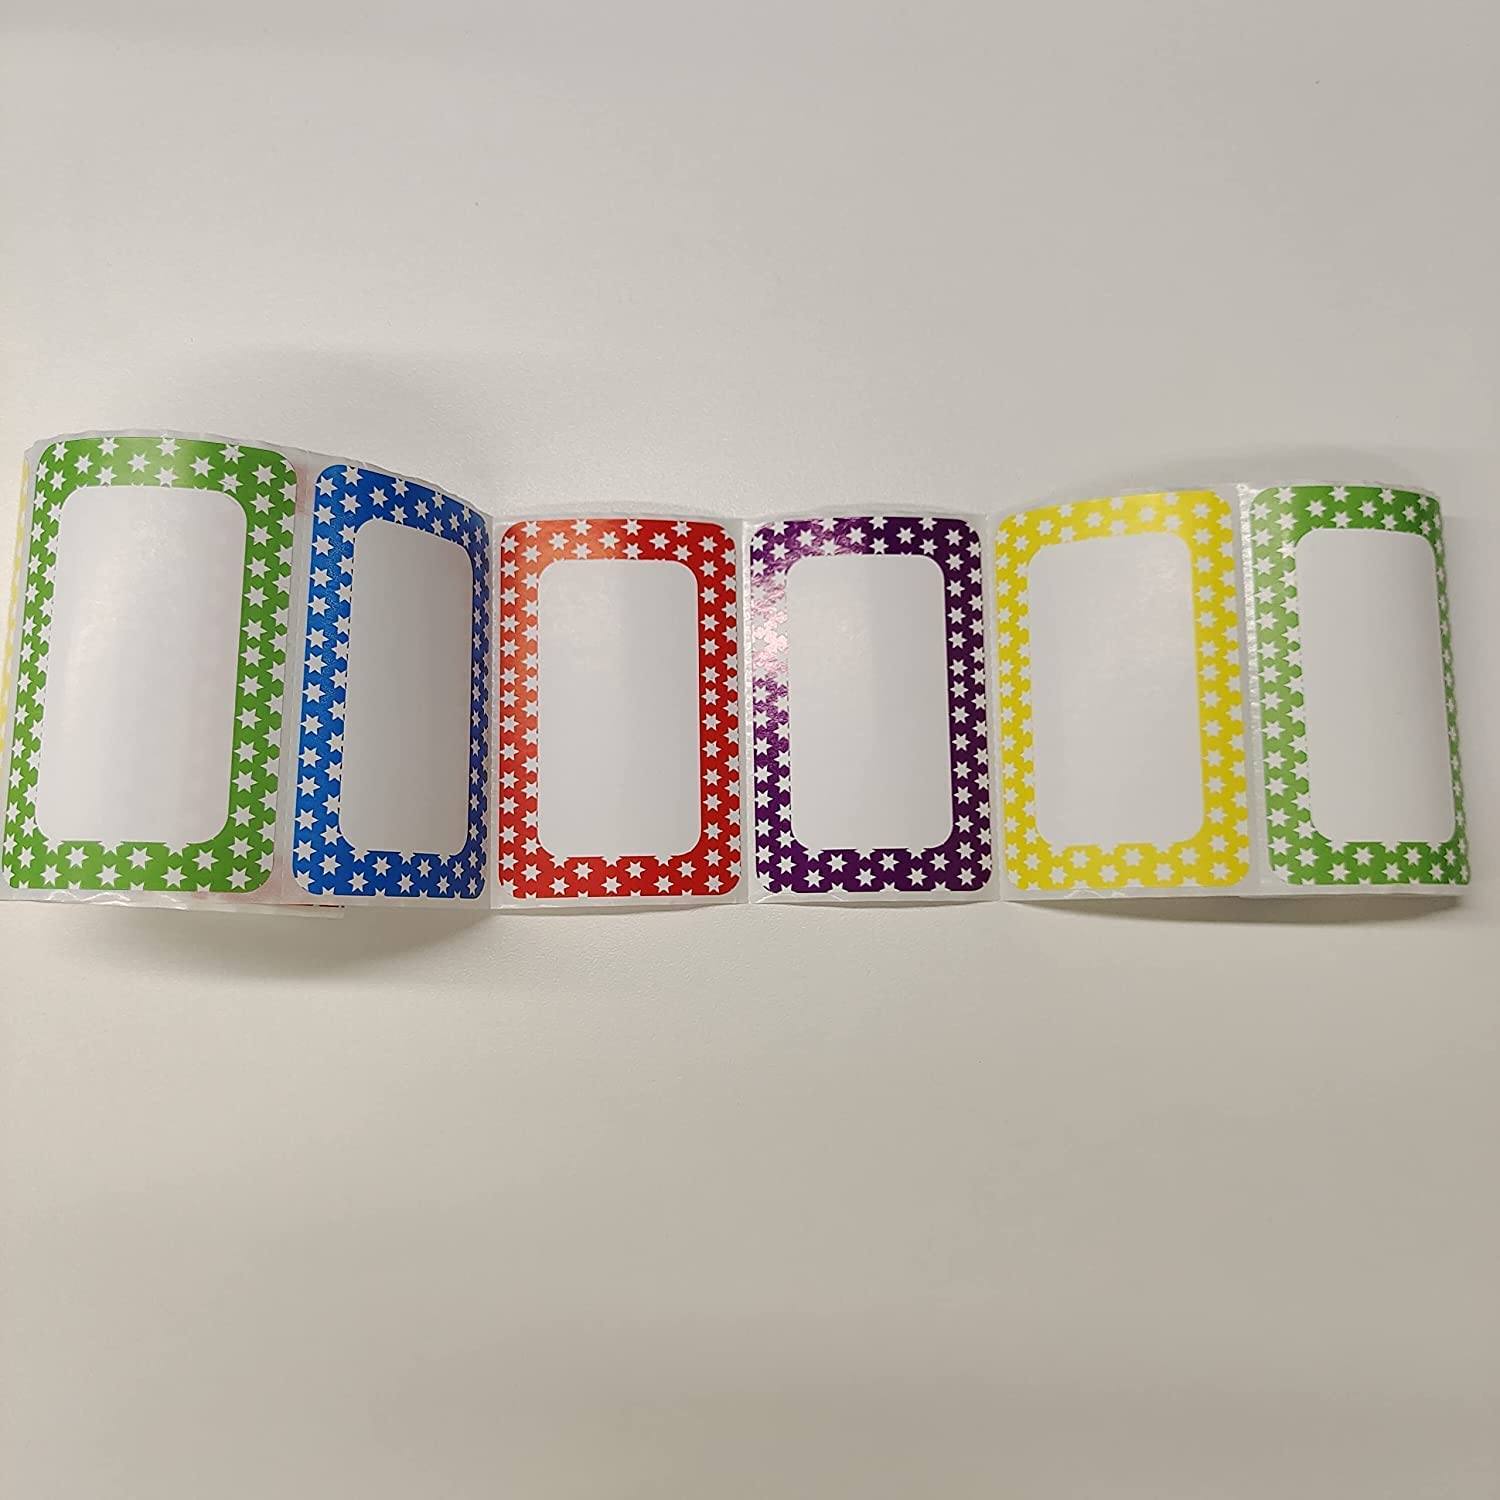 Name Tag , Name identification stickers for students with a star design